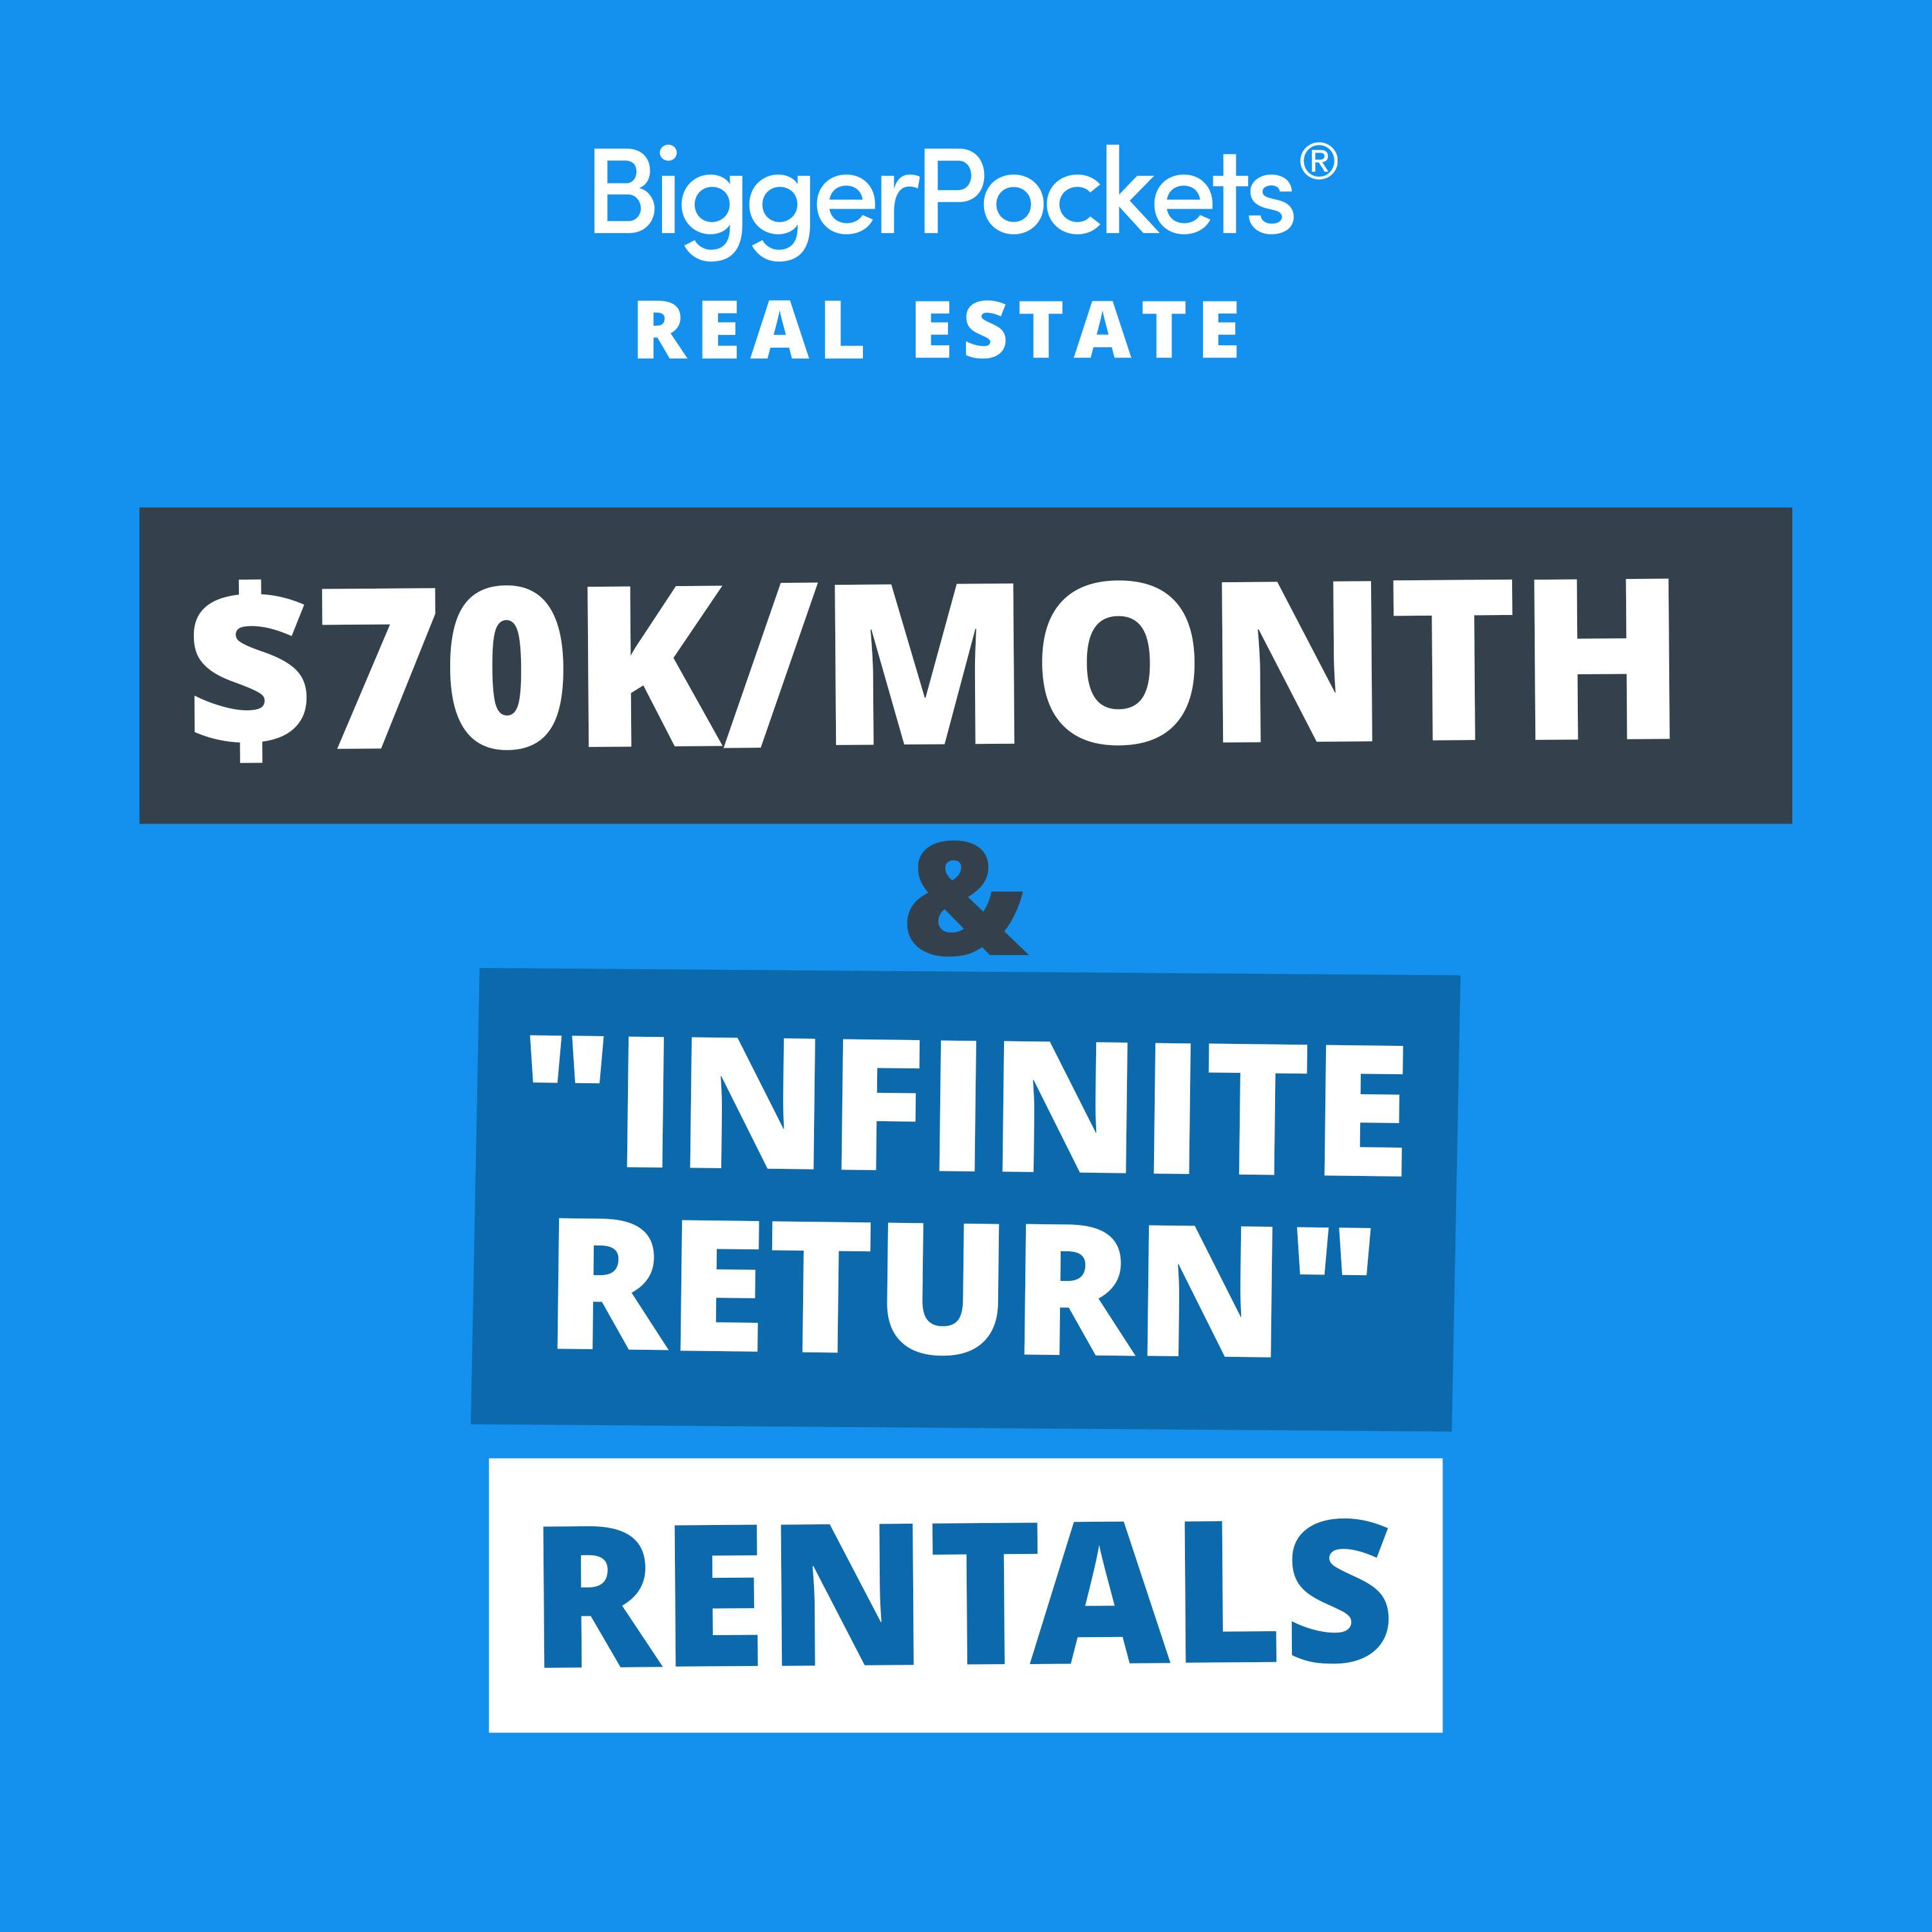 788: From $26K/Year Paycheck to $70K/MONTH Rent Checks w/Lamon Woods